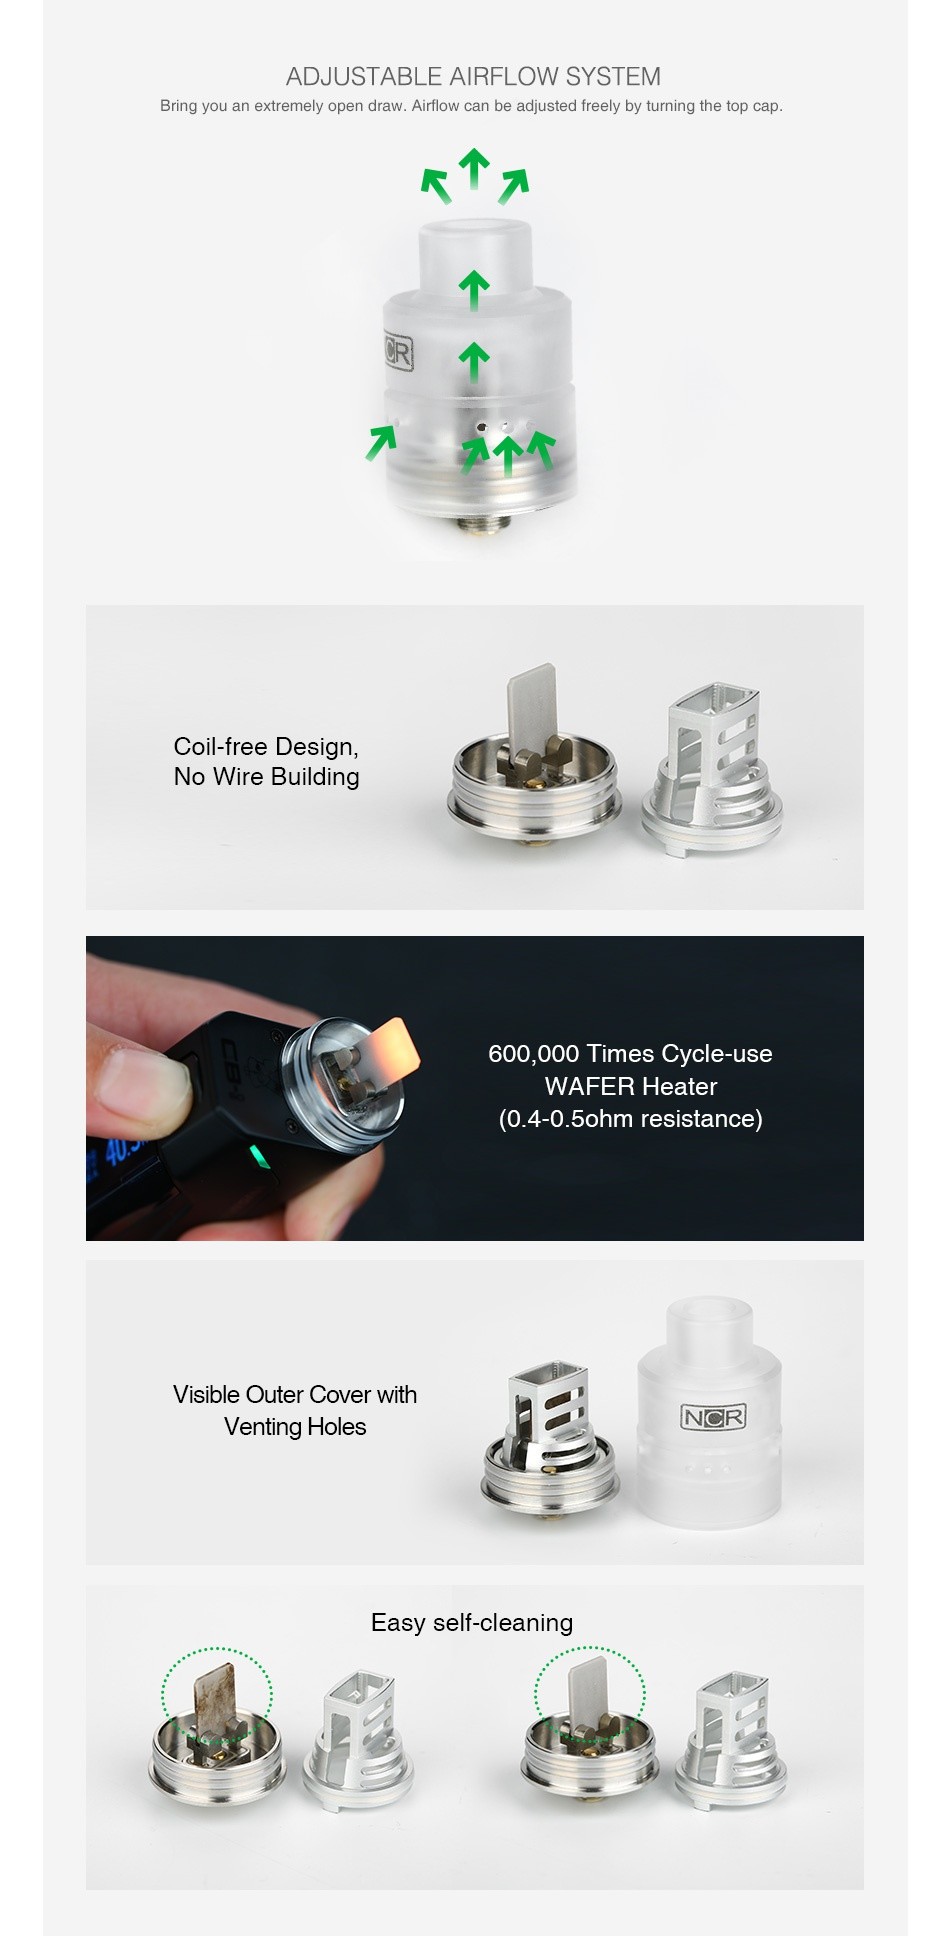 NCR New Concept RDA ADJUSTABLE AIRFLOW SYSTEM Bring you an extremely open draw  Airflow can be adjusted freely by turning the top cap     Coil free Design No Wire Building 600 000 Times Cvcle use WAFER Heater  0 4 0 ohm resistance  Visible outer cover with Venting holes NCR Easy self cleaning